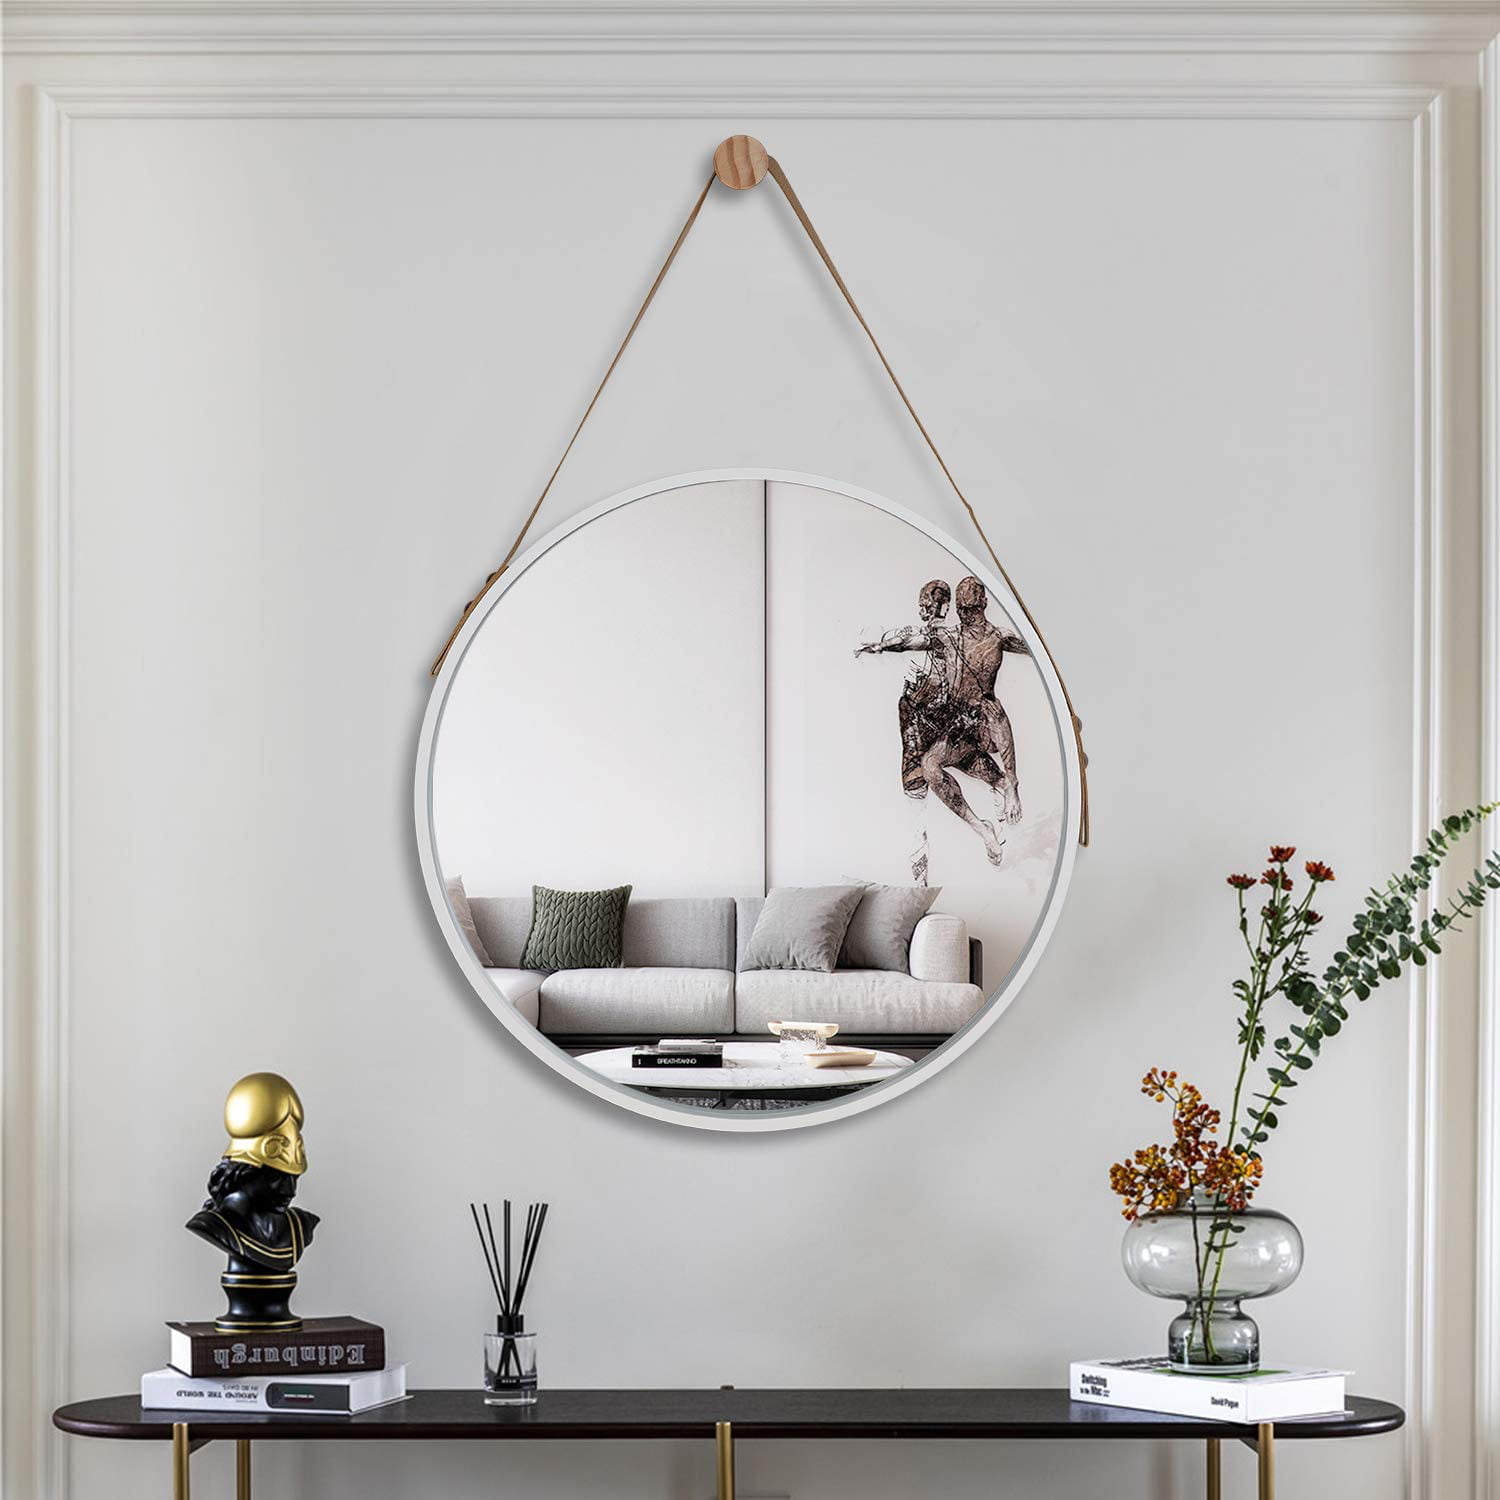 Mirrors for Wall Decor Mirror Bathroom Wall Mounted Make Up Mirror